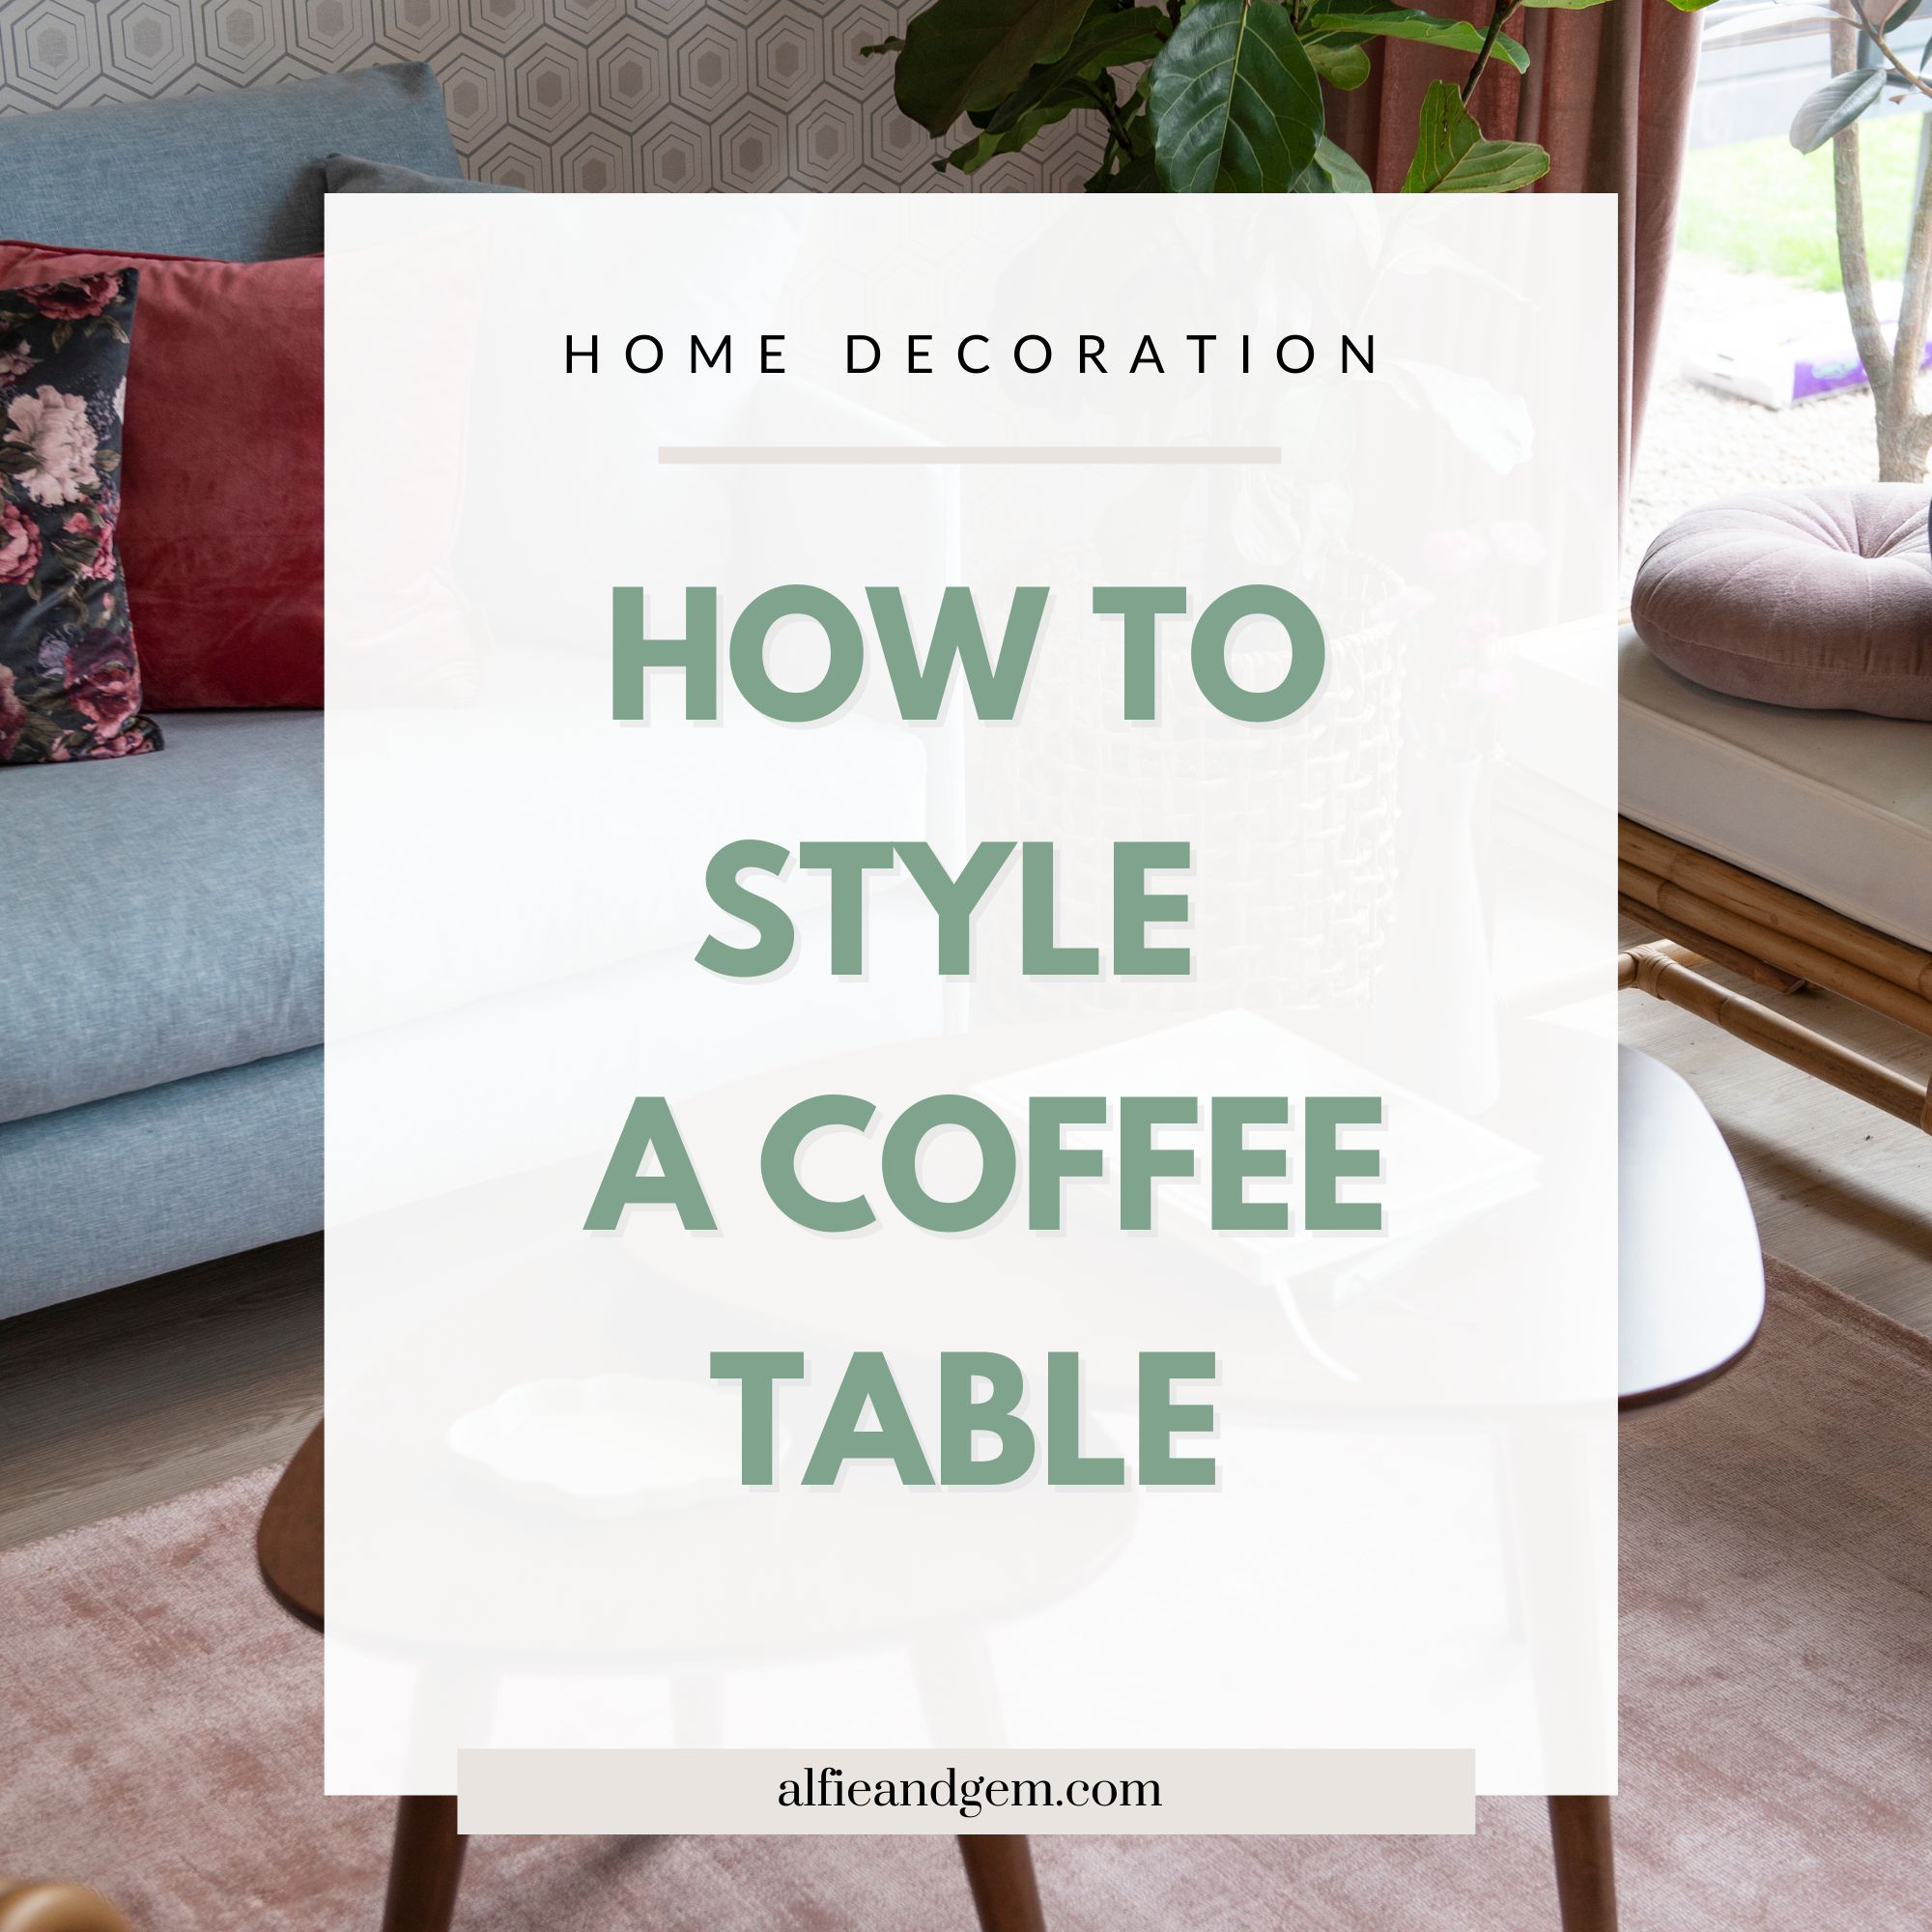 5 Basic Tips For Styling A Coffee Table